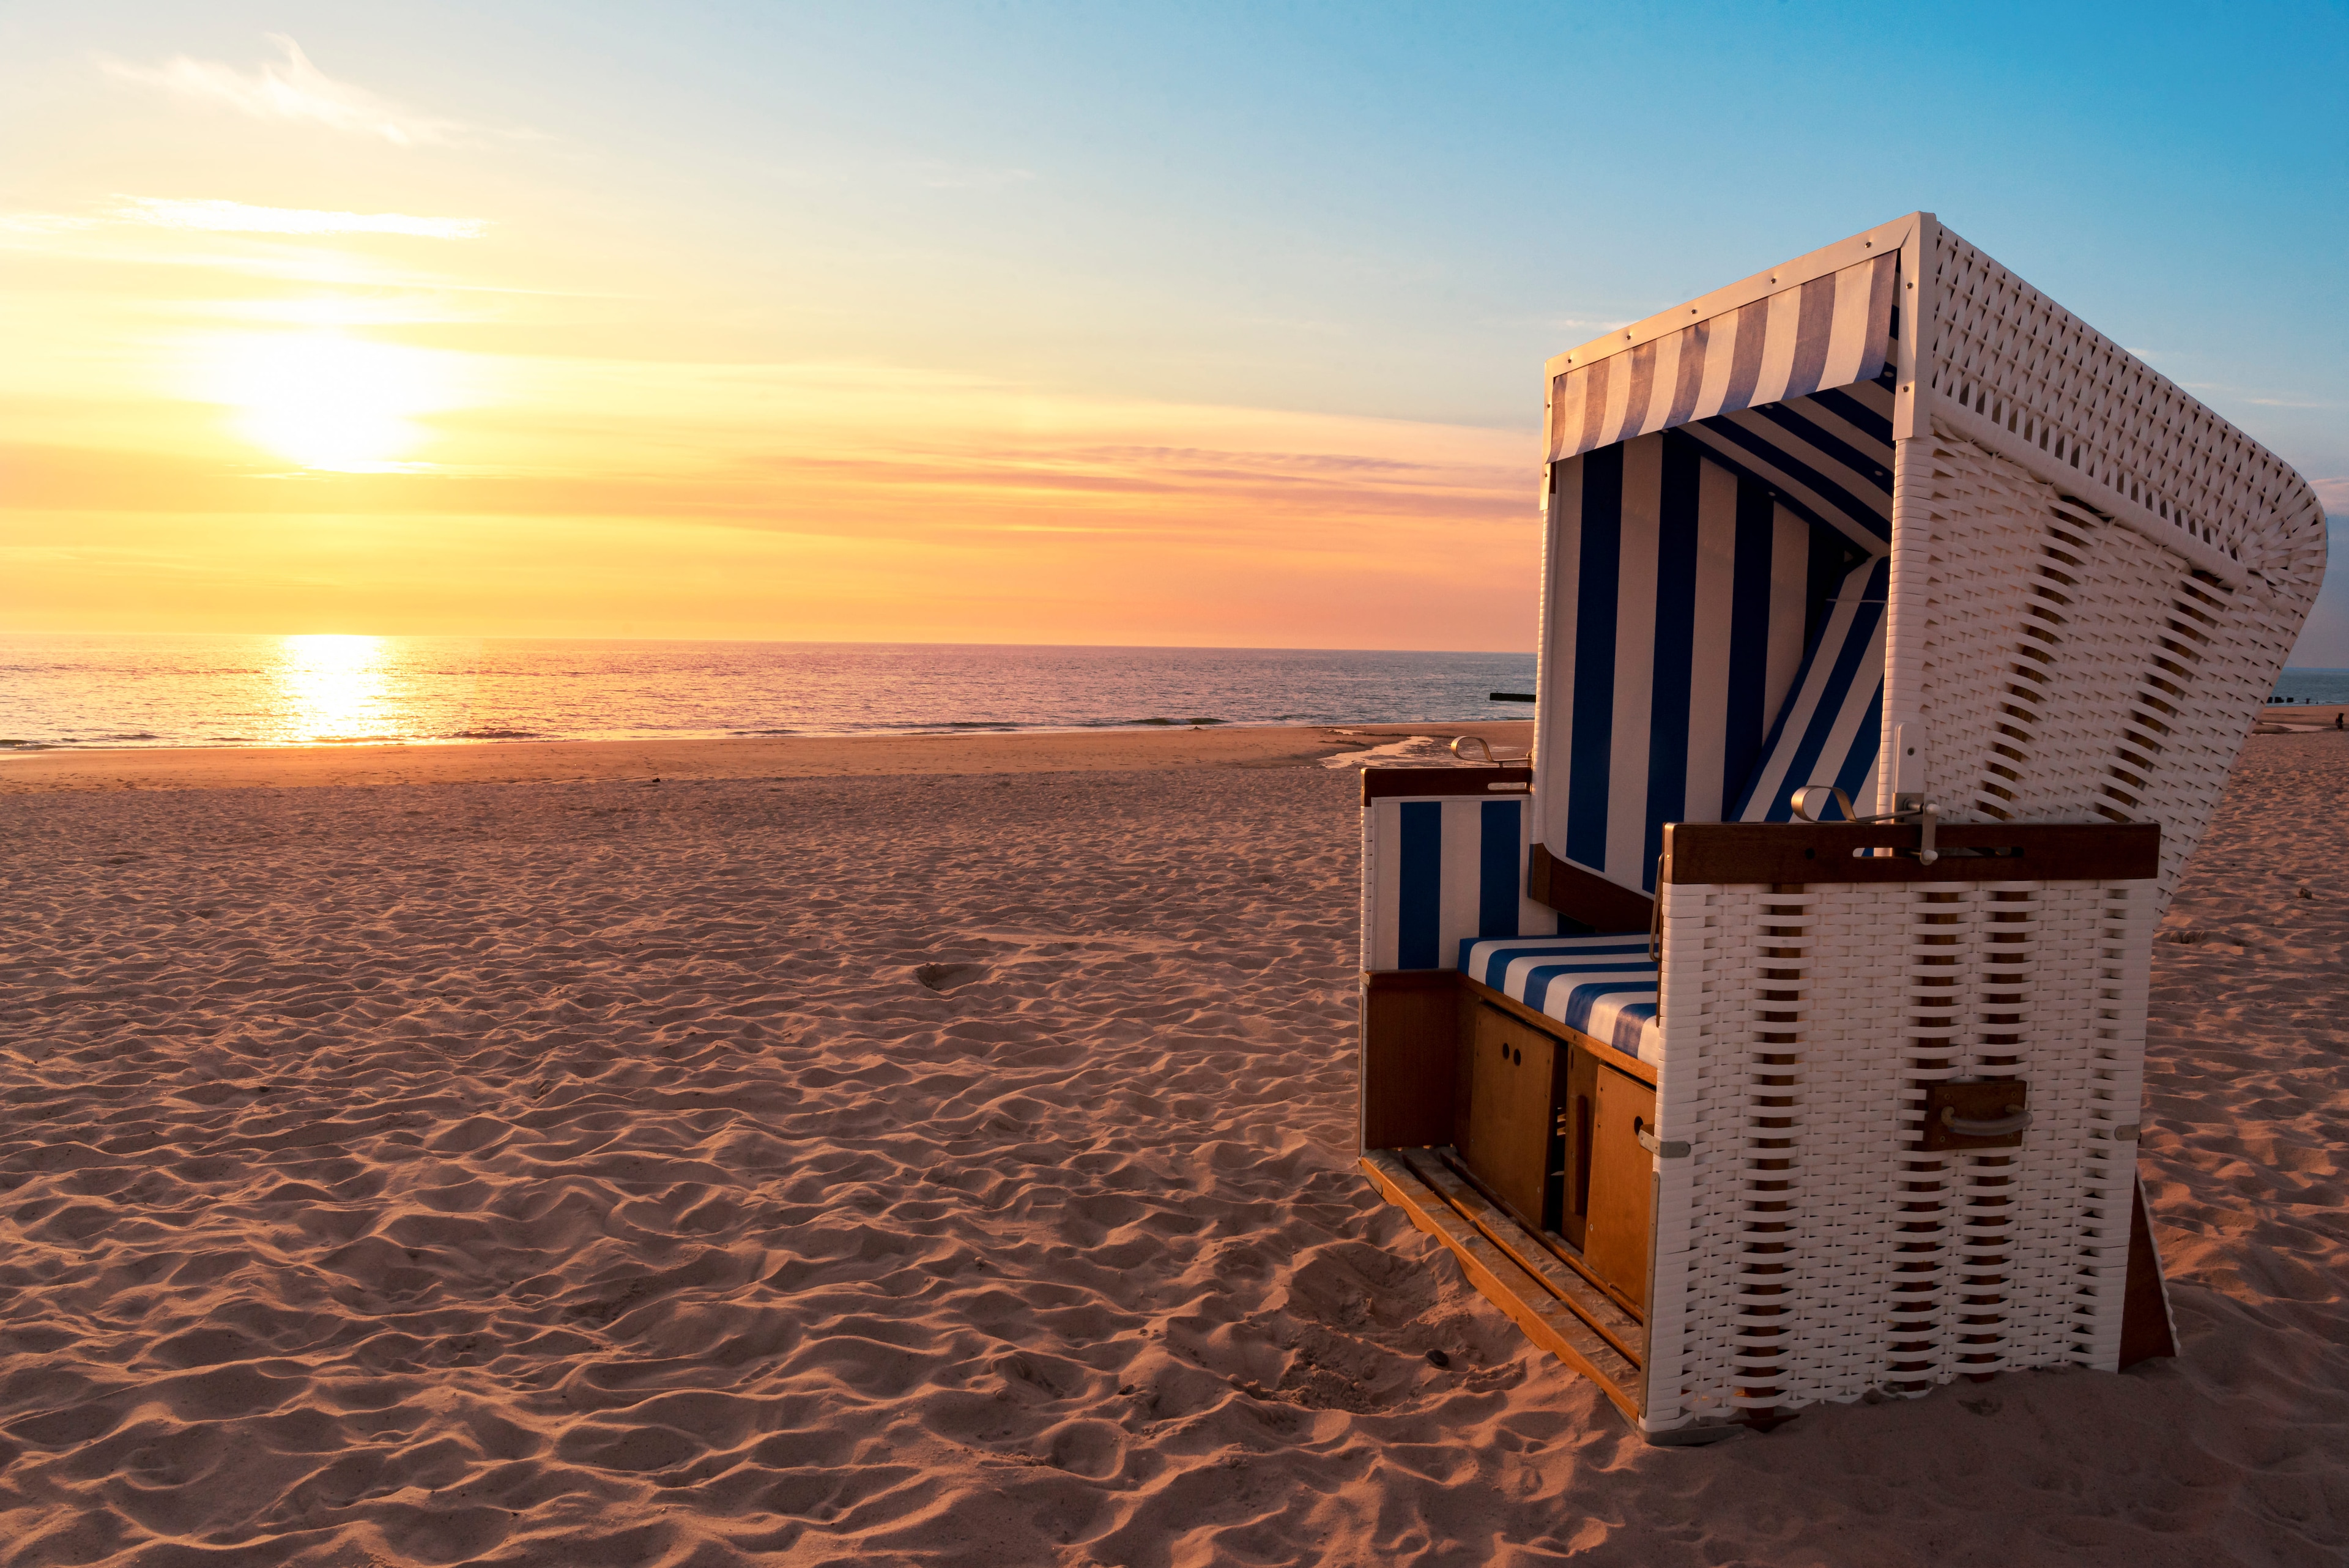 Beautiful Beaches in Germany that You Shouldn’t Miss